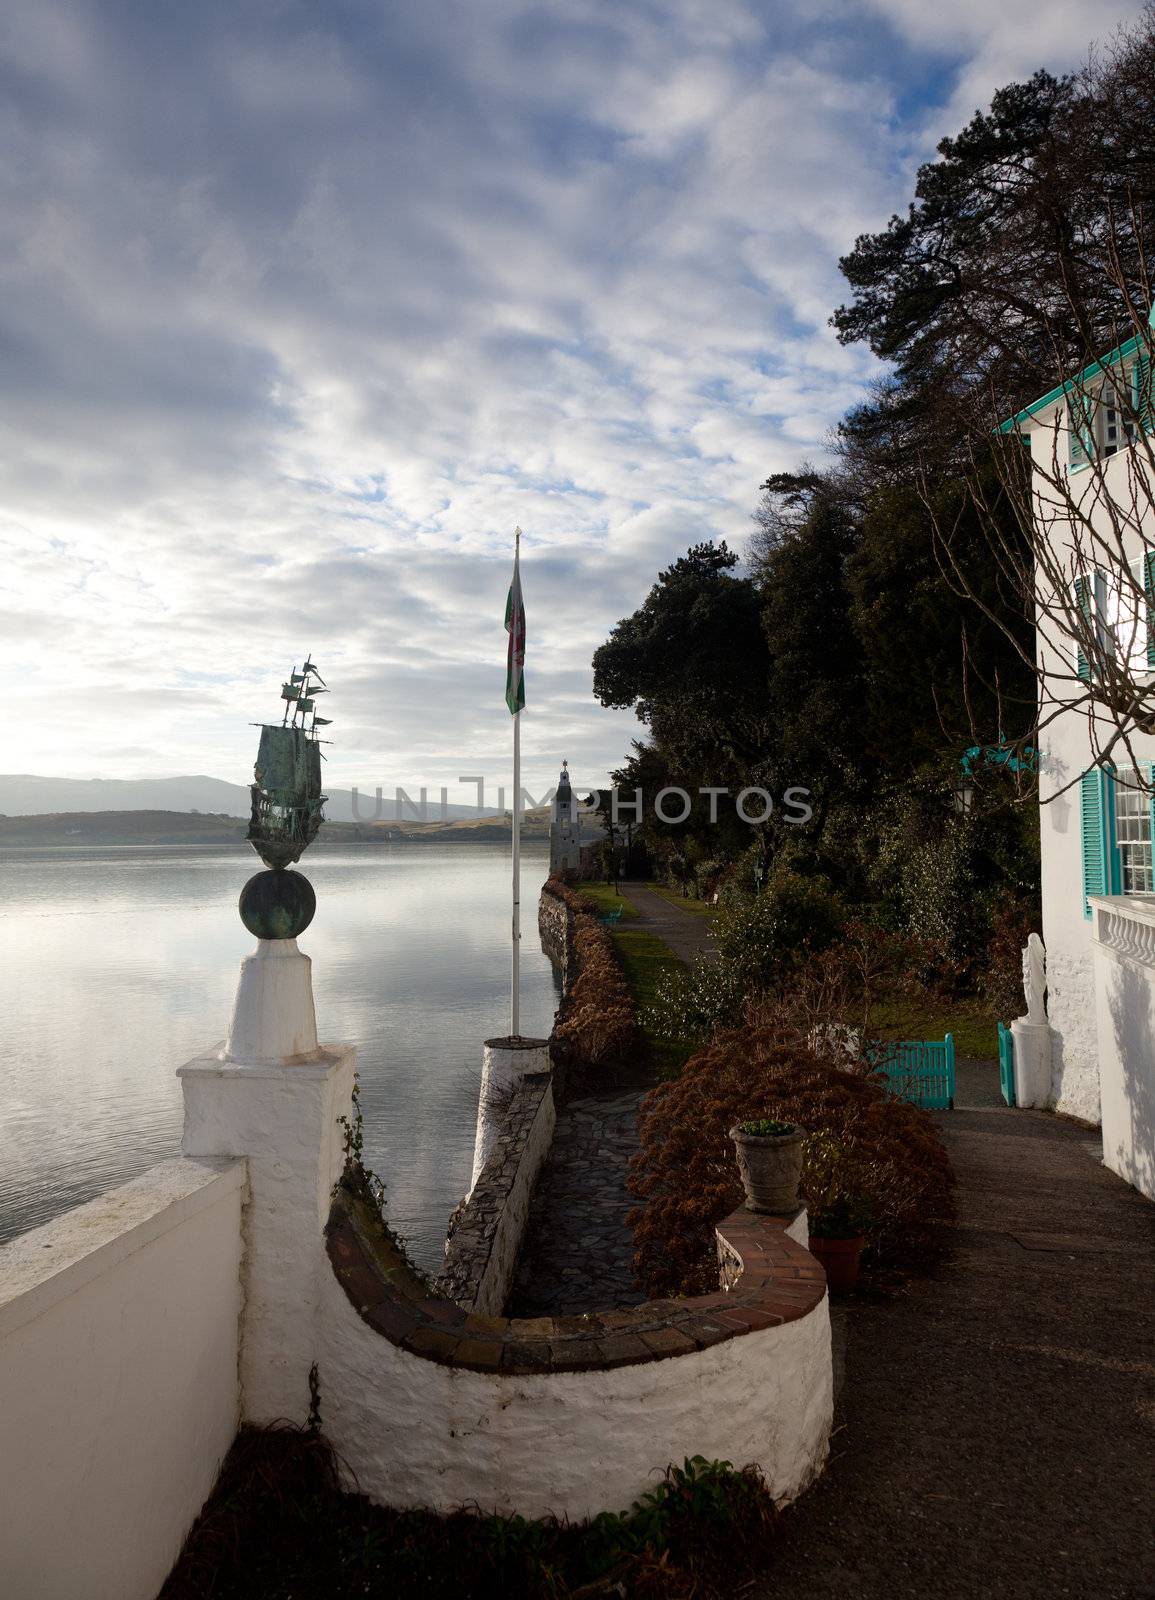 Winter scene at Portmeirion in Wales by steheap